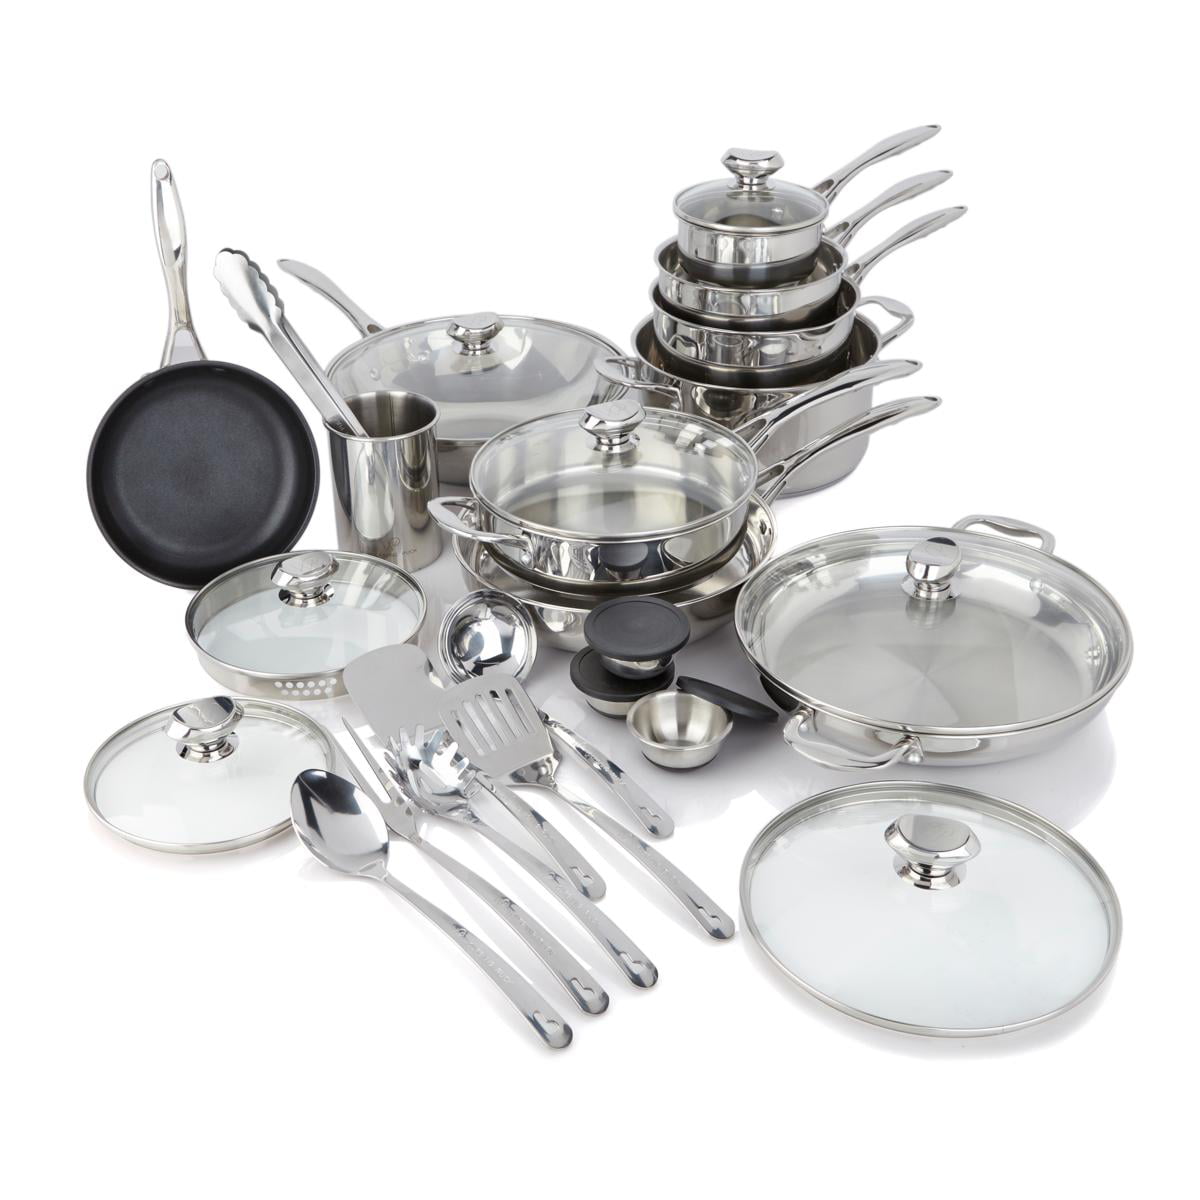 Wolfgang Puck Stainless Steel Cookware Sets